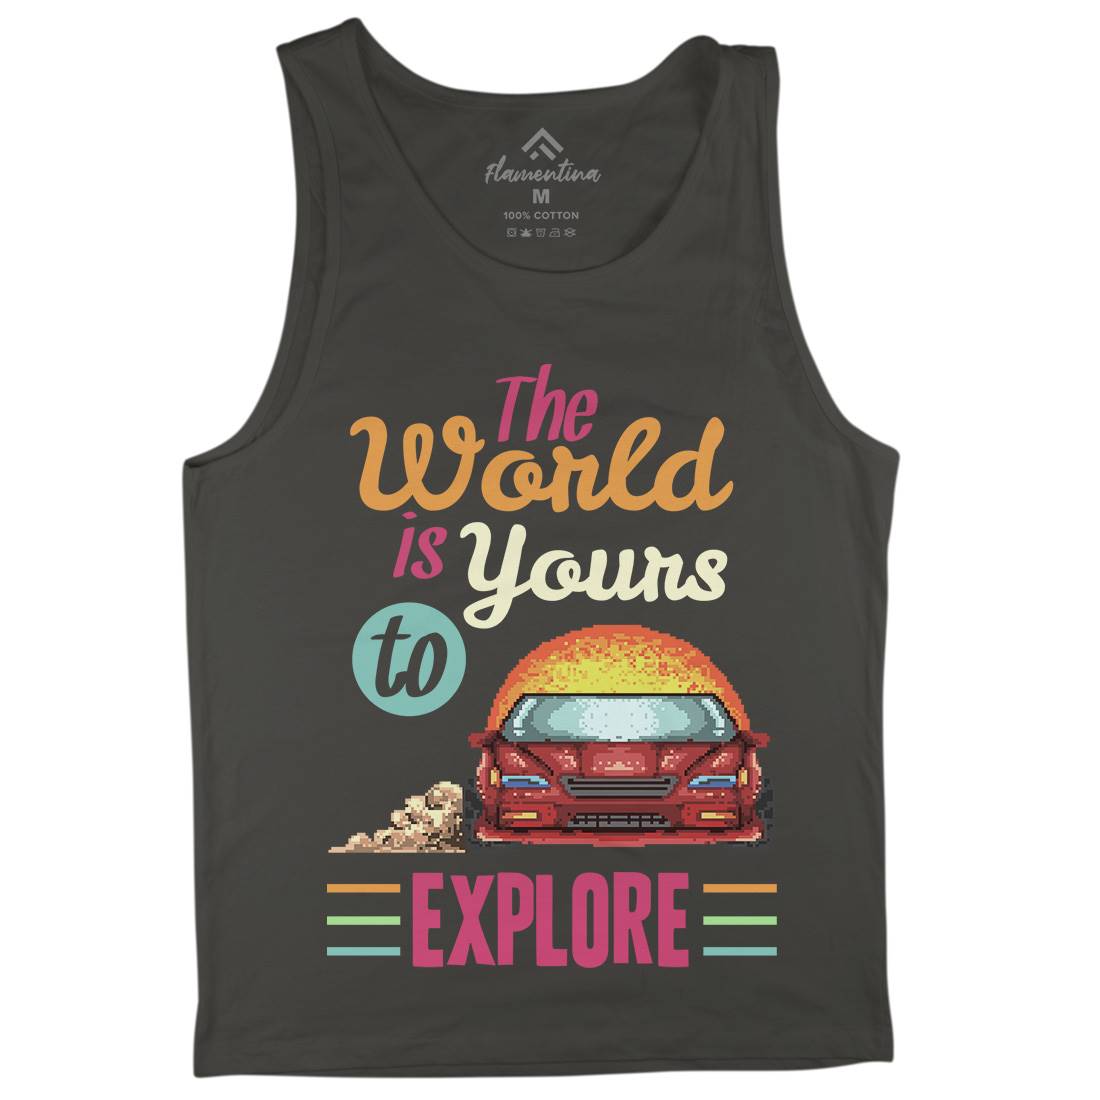 The World Is Yours To Explore Mens Tank Top Vest Cars B970